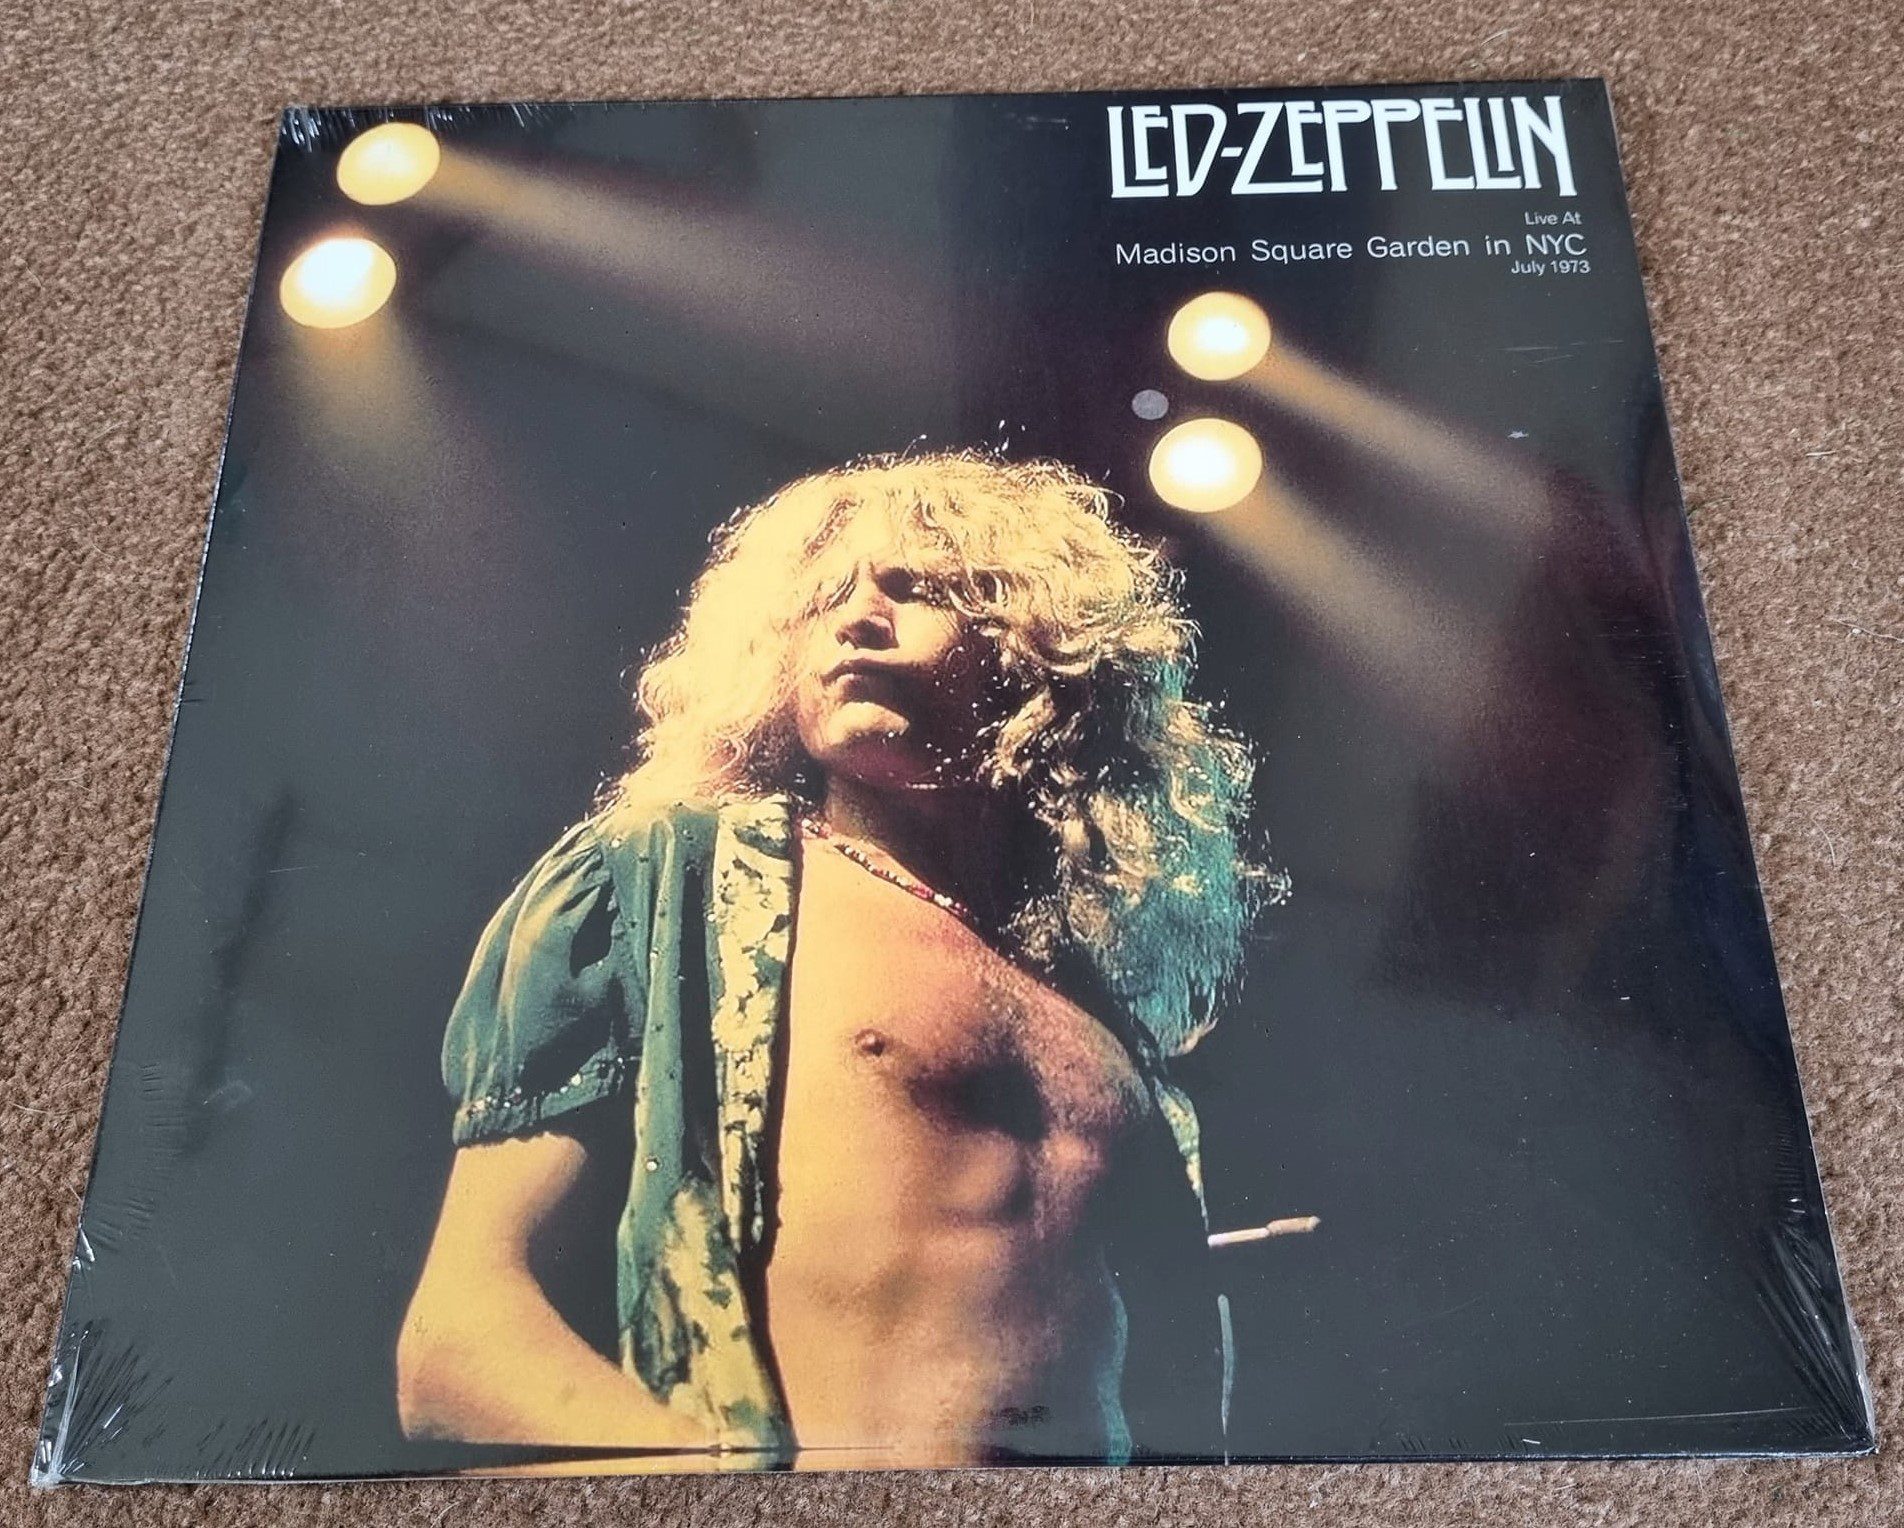 Buy this rare Led Zeppelin record by clicking here